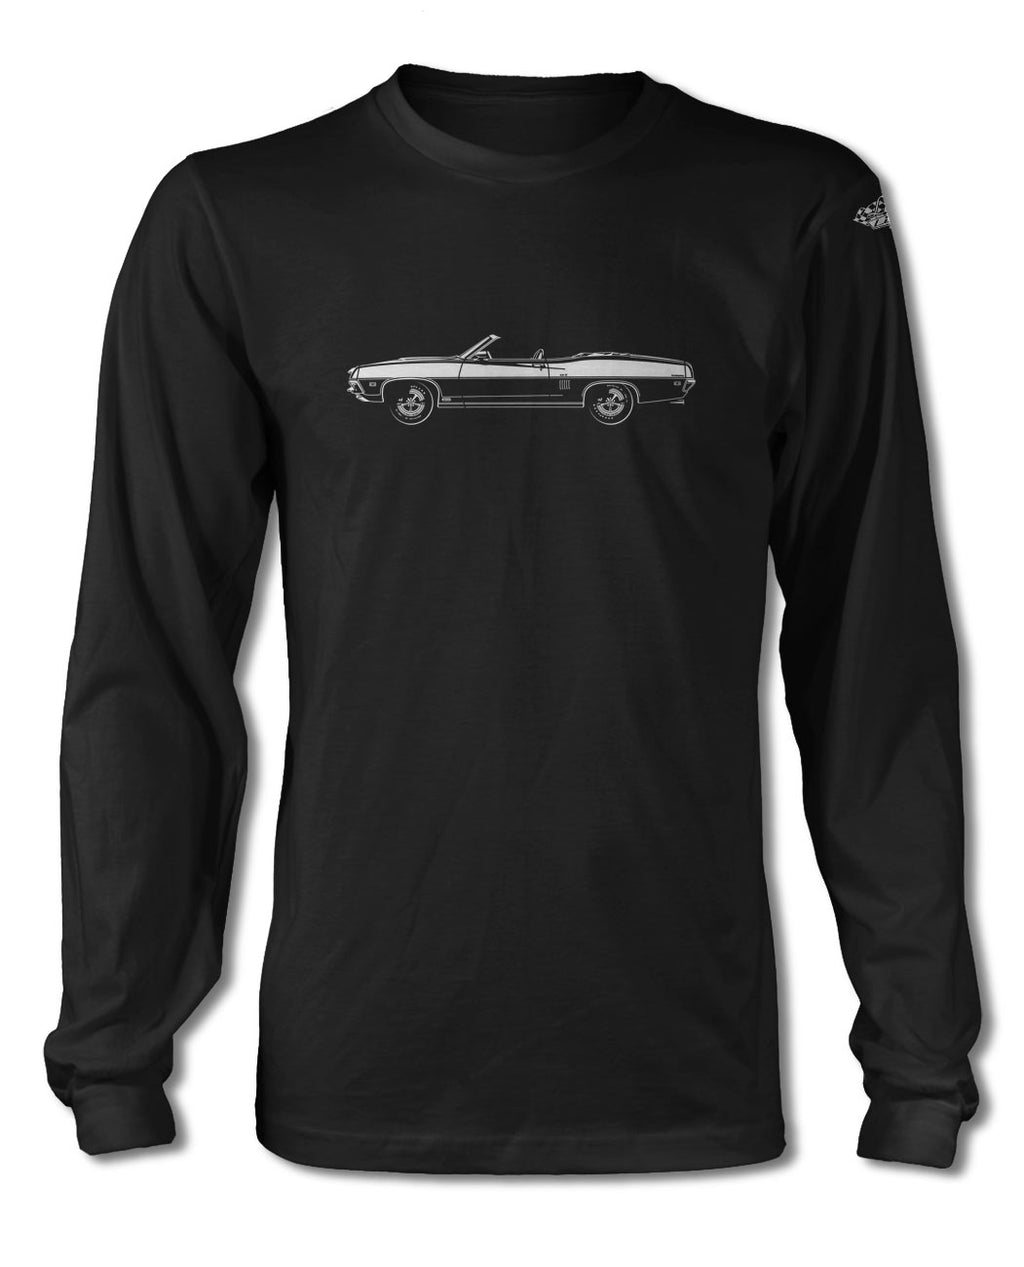 1970 Ford Torino GT Convertible T-Shirt - Long Sleeves - Side View